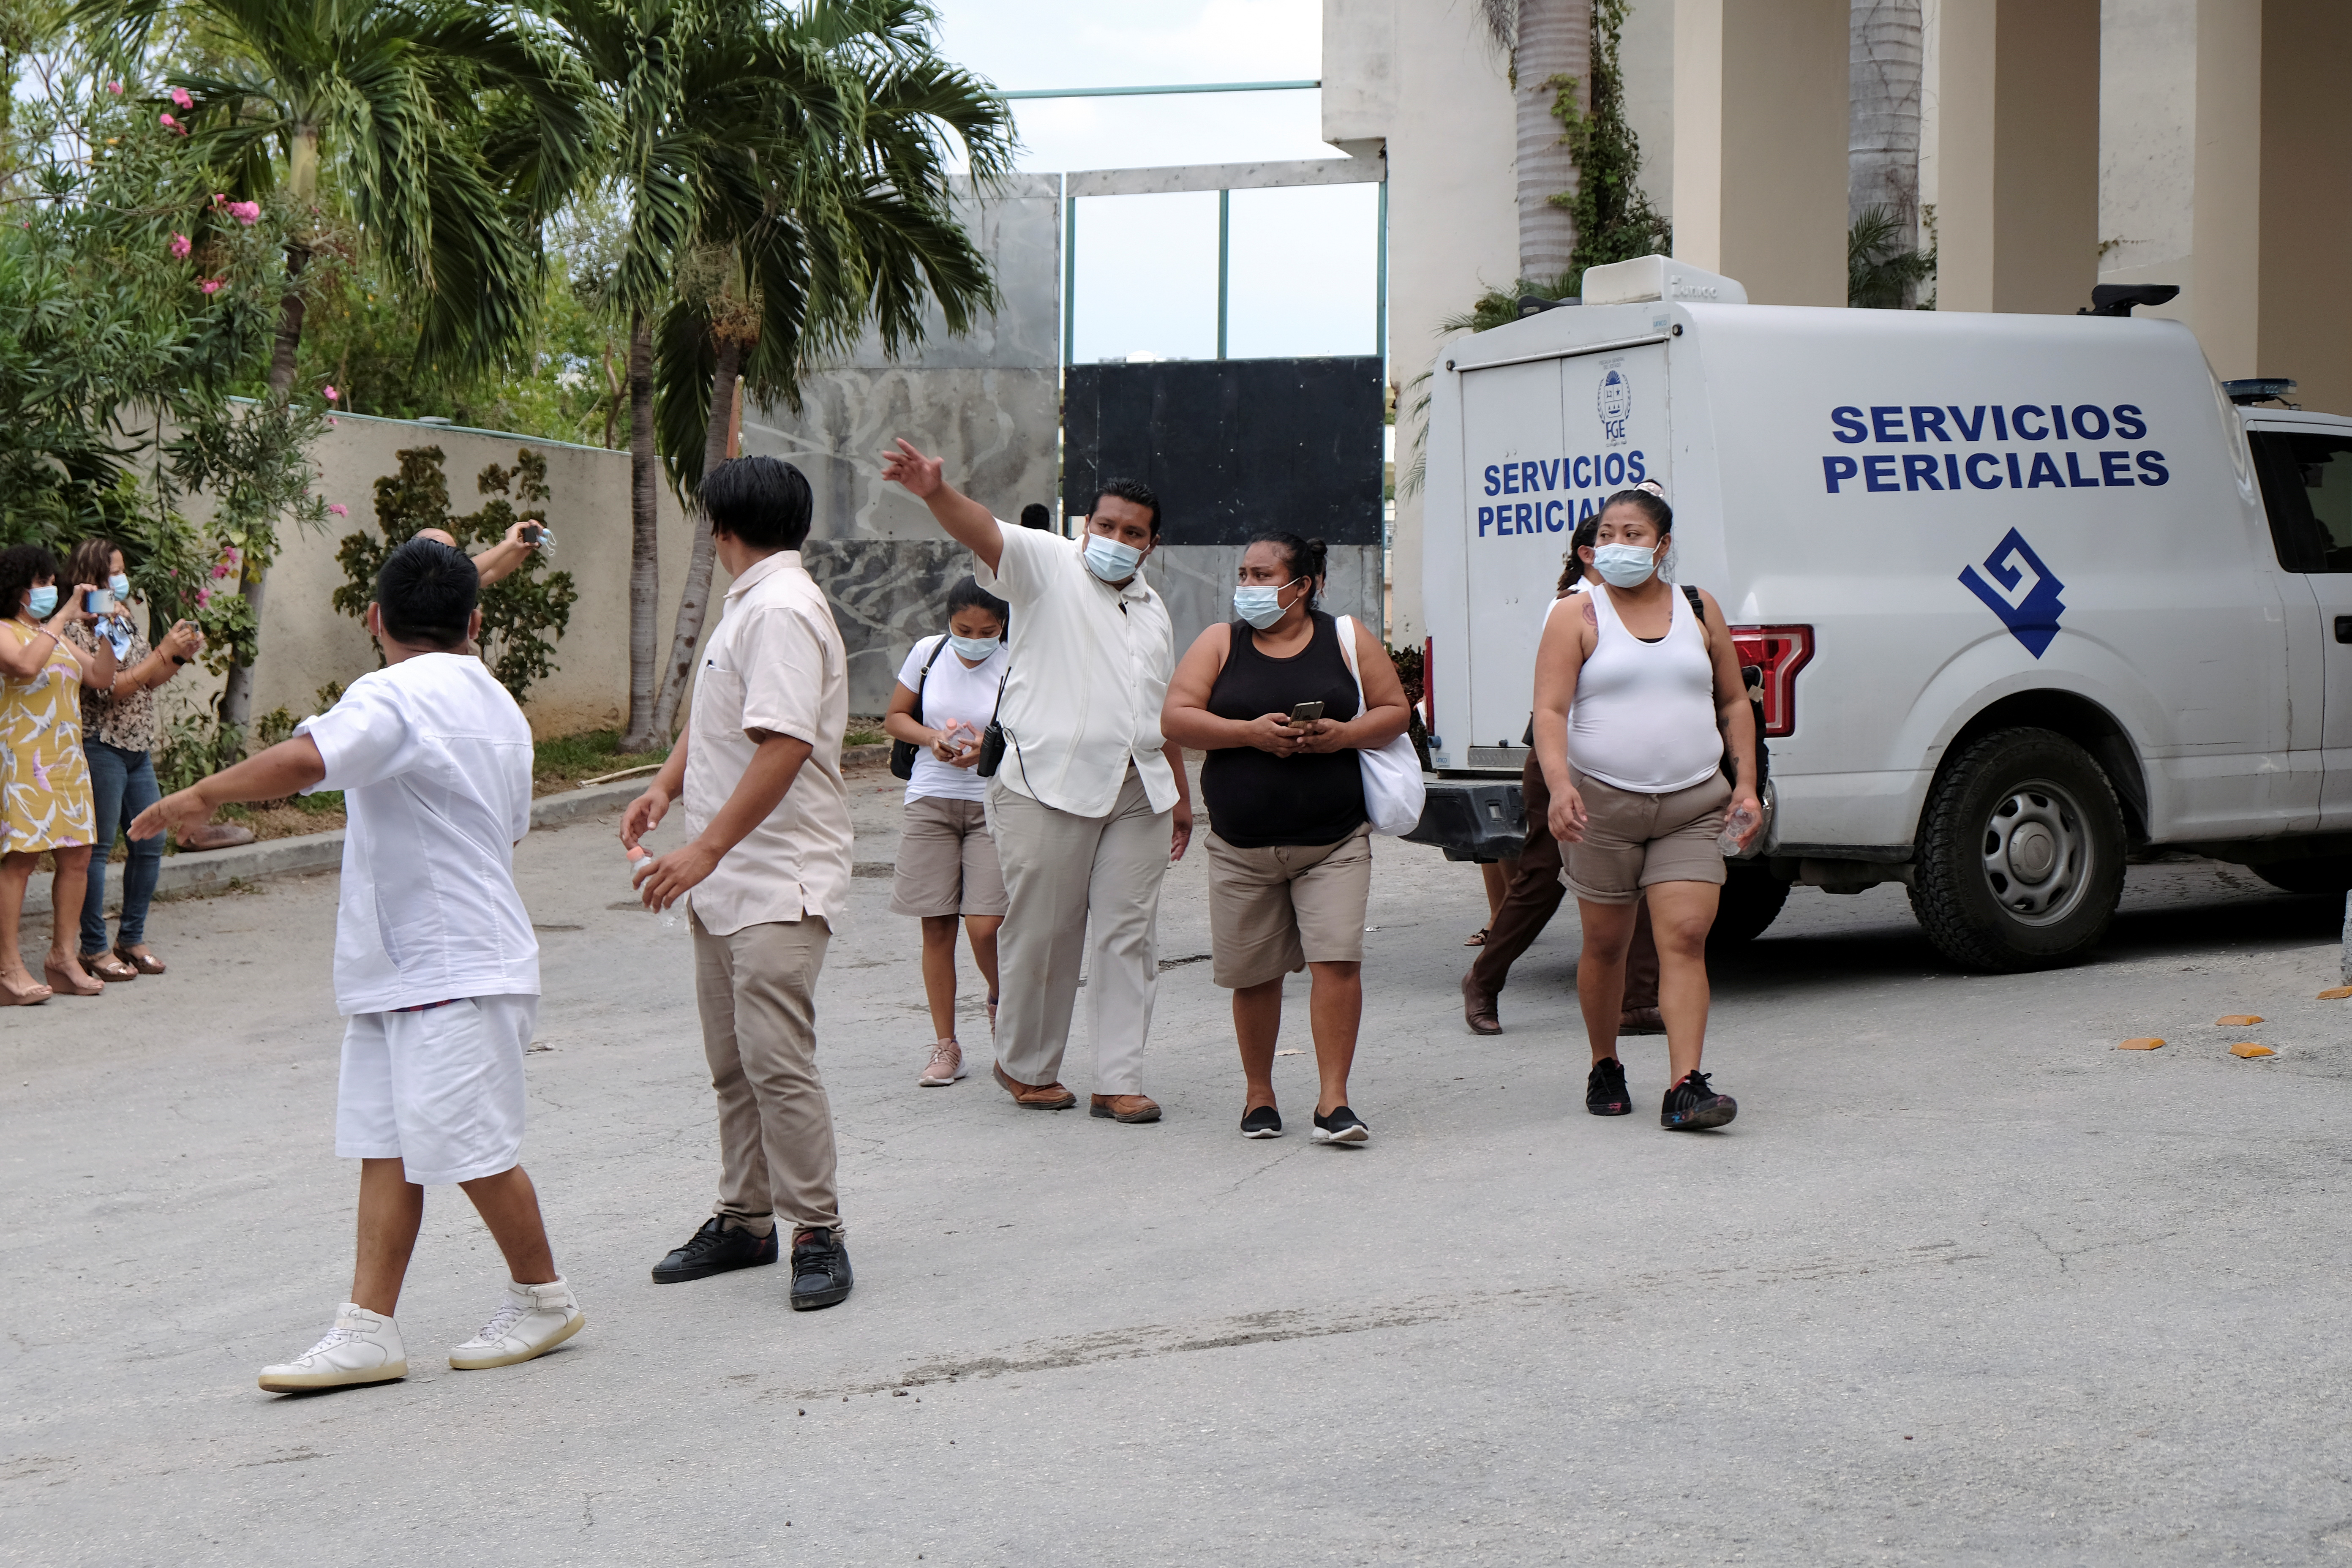 Hotel workers are seen at the entrance to a hotel after two suspected drug gang members were shot dead in a beachfront clash between rival groups near the Mexican resort of Cancun, in Puerto Morelos, Mexico November 4, 2021. REUTERS/Paola Chiomante 